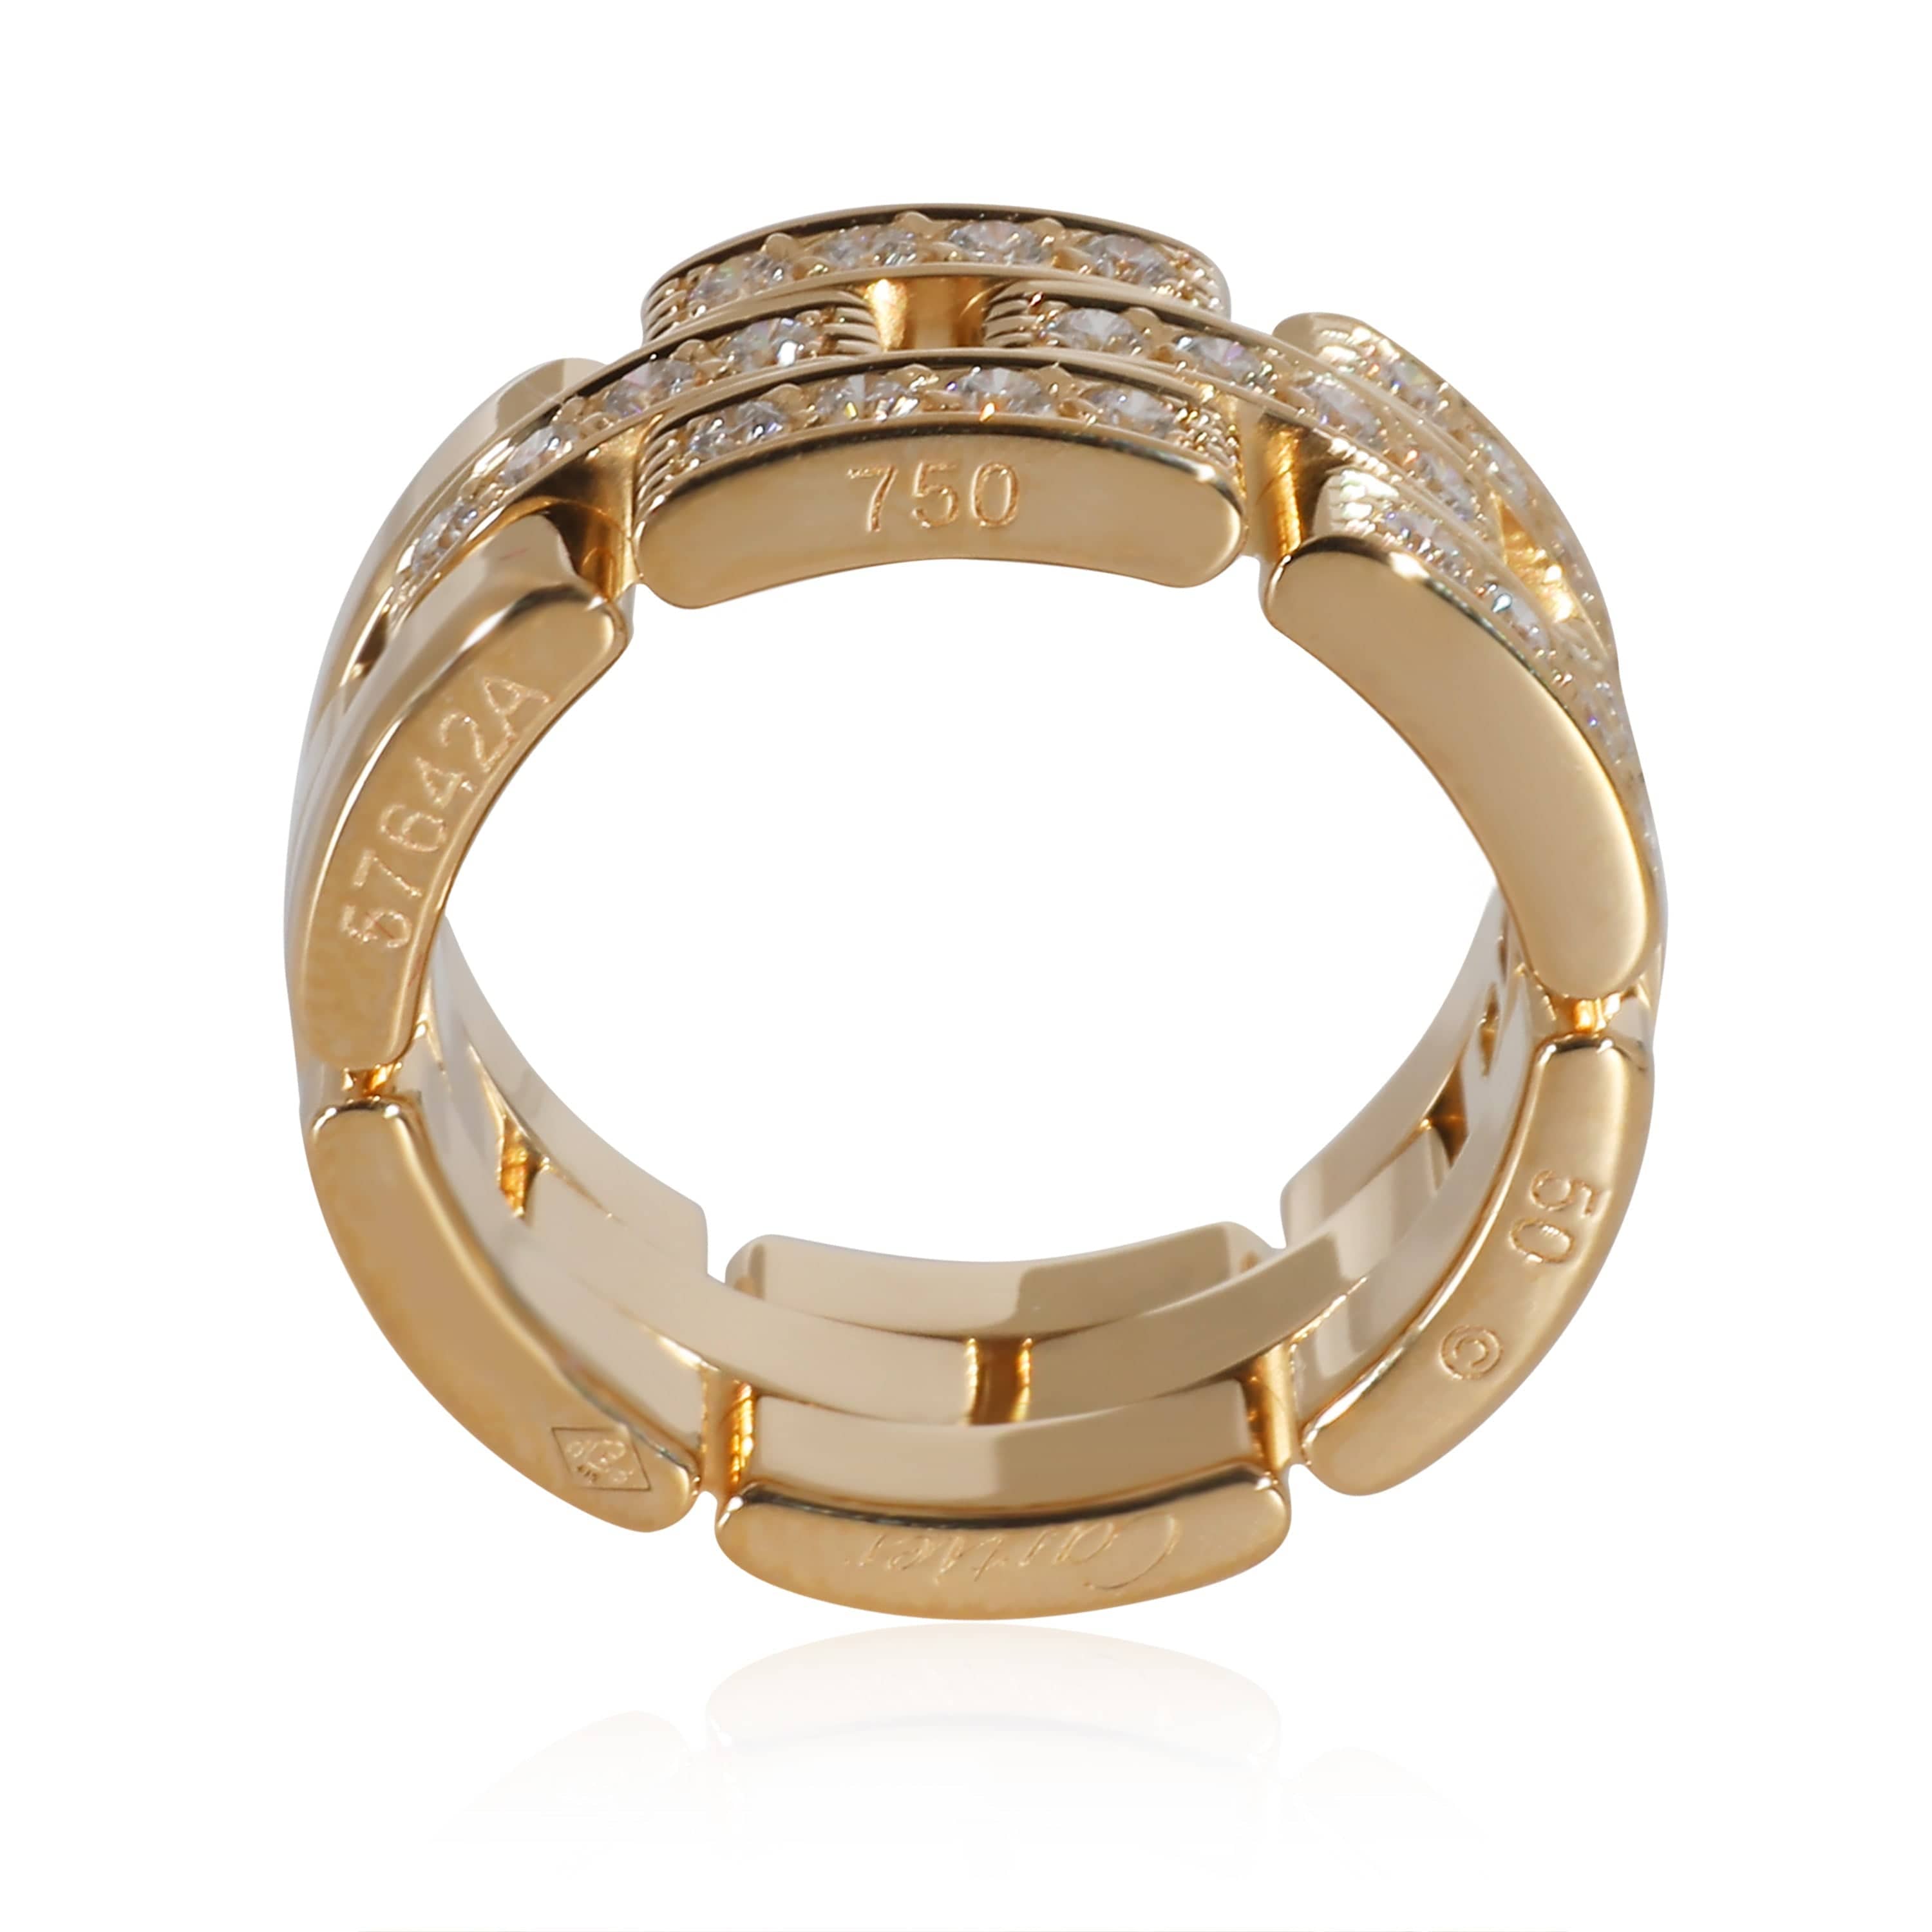 Cartier Cartier Maillon Panthere Band in 18k Yellow Gold 0.53 CTW